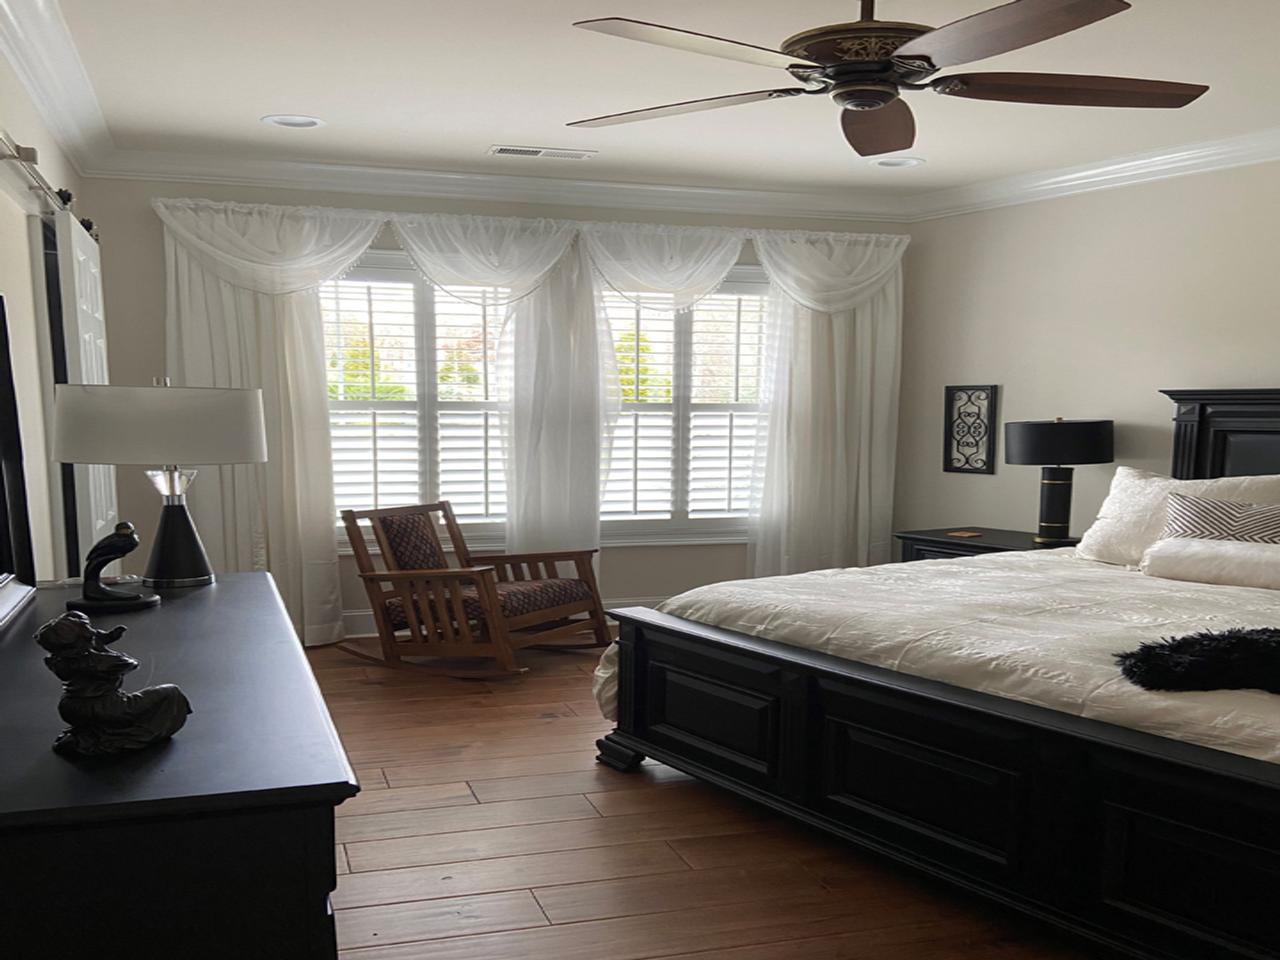 Bedroom with shutters and sheer drapes